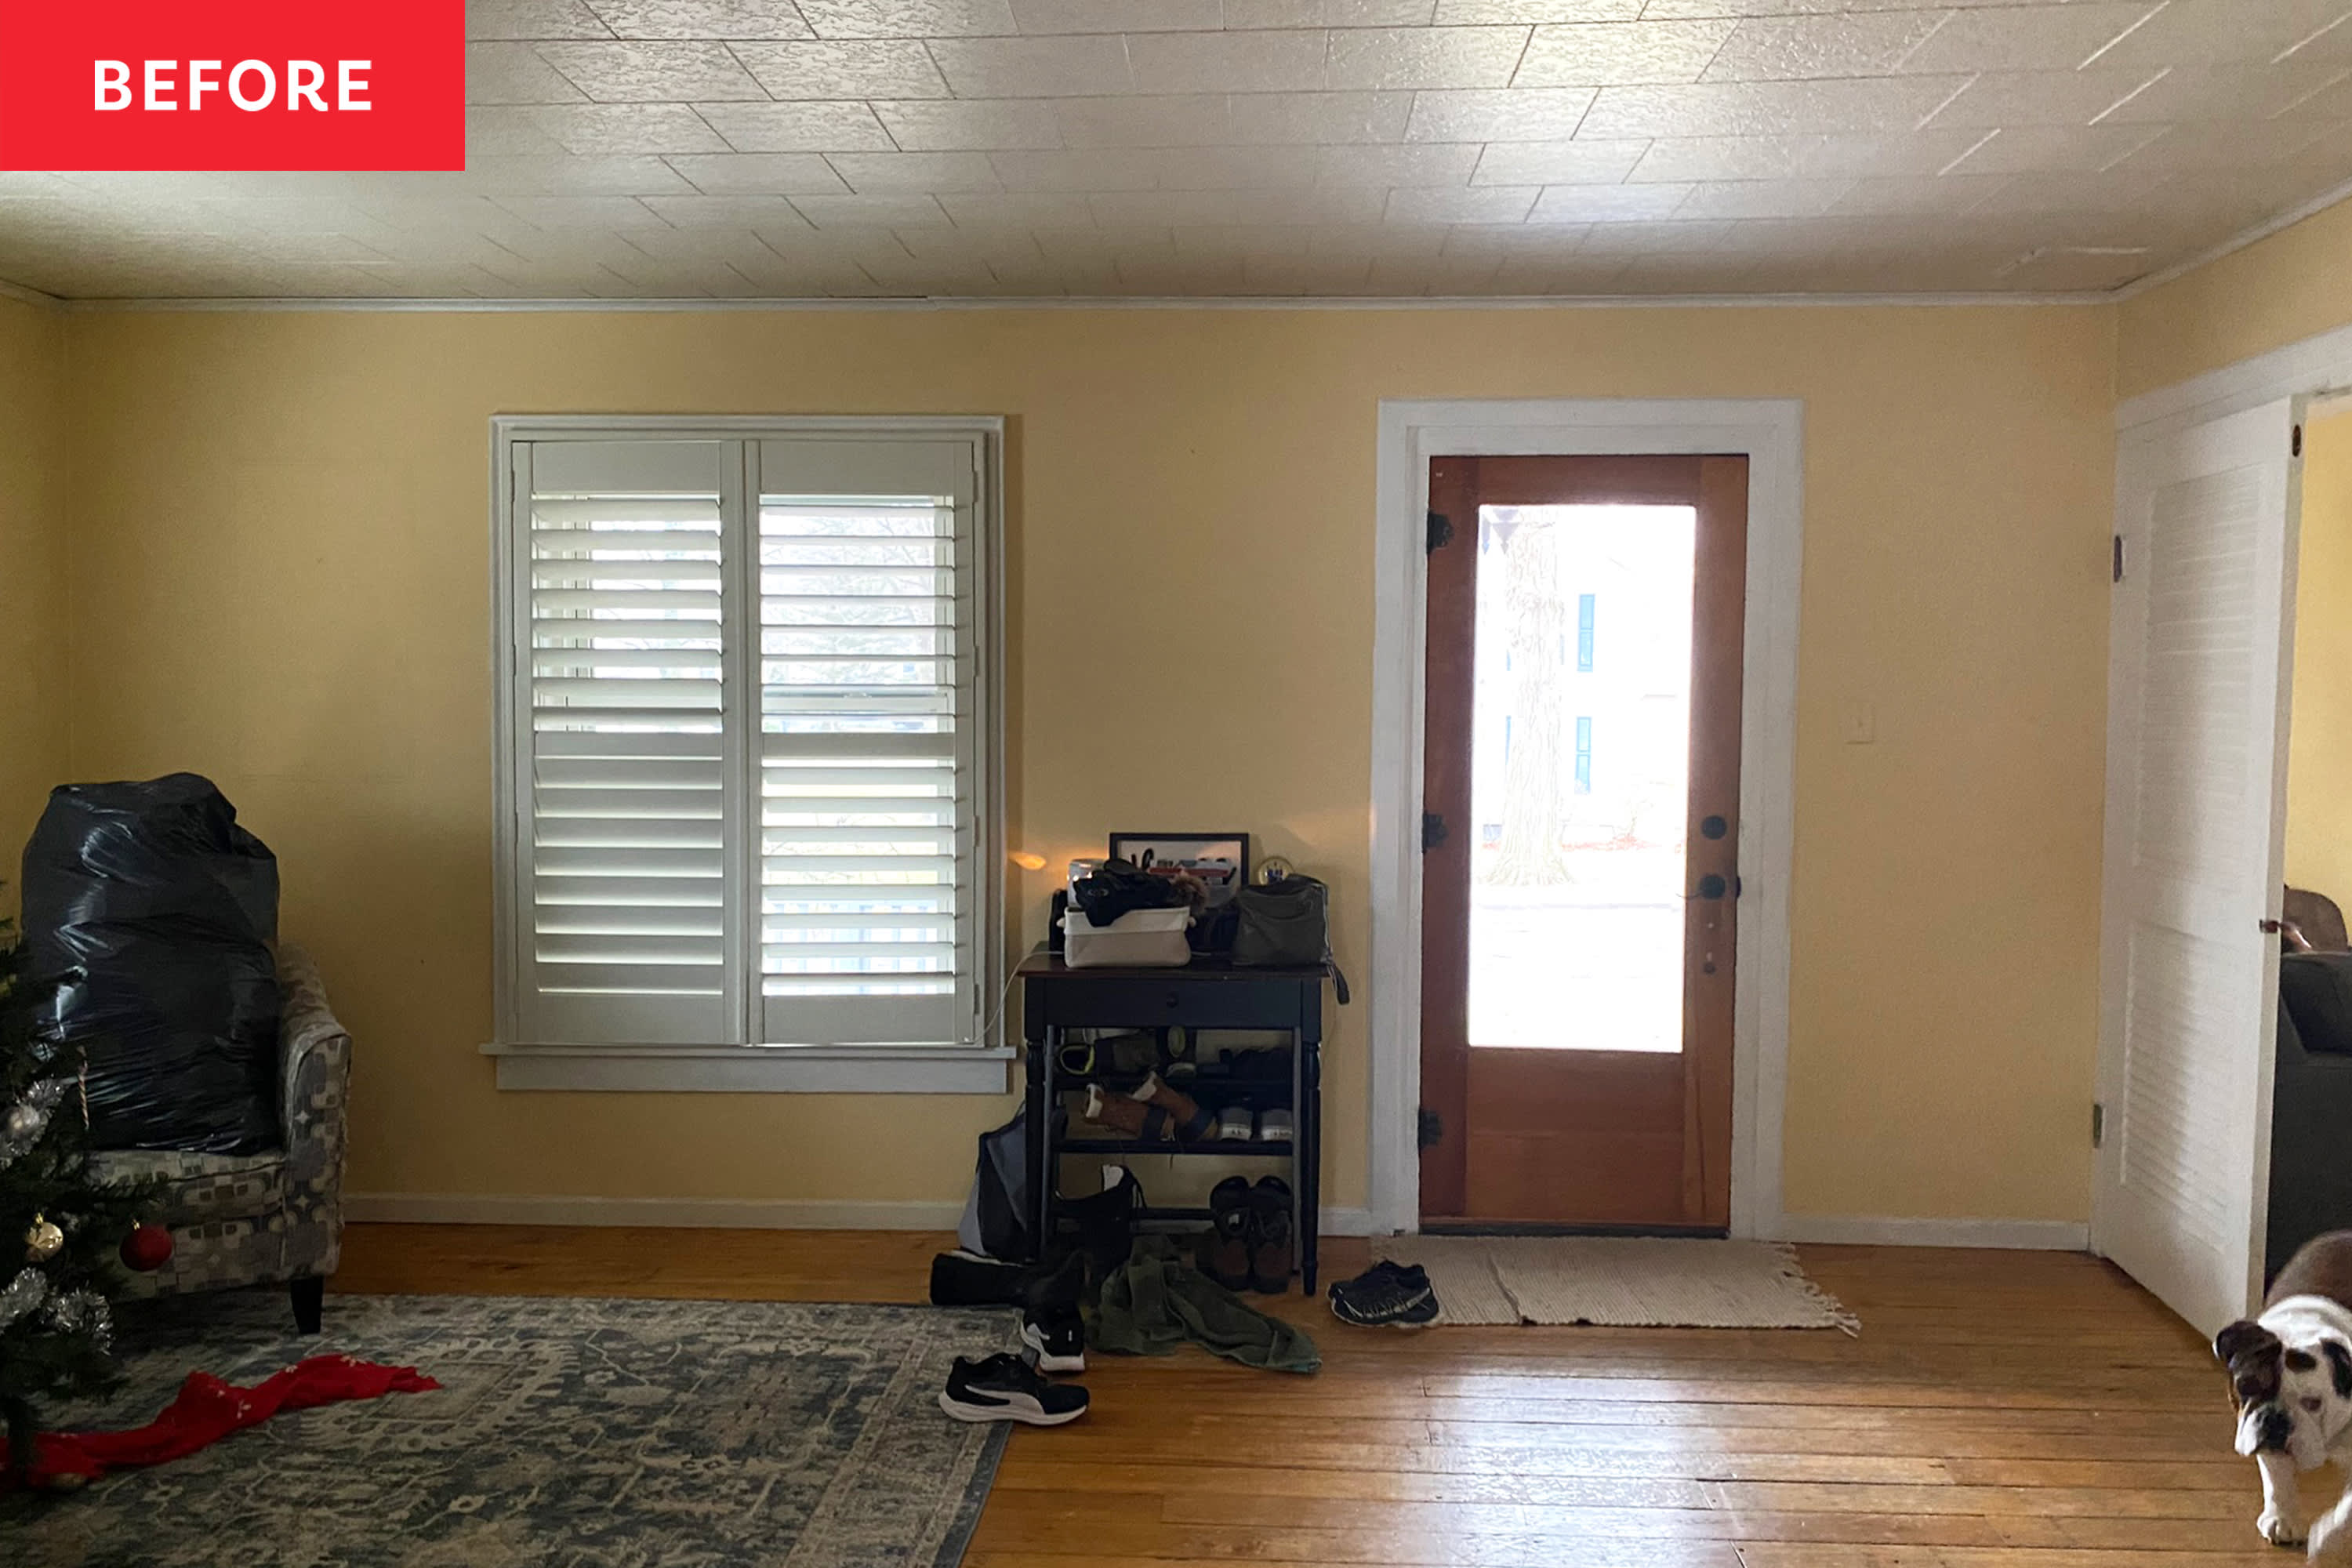 Green Sitting Room Redo with DIY Moulding - Before and After Photos